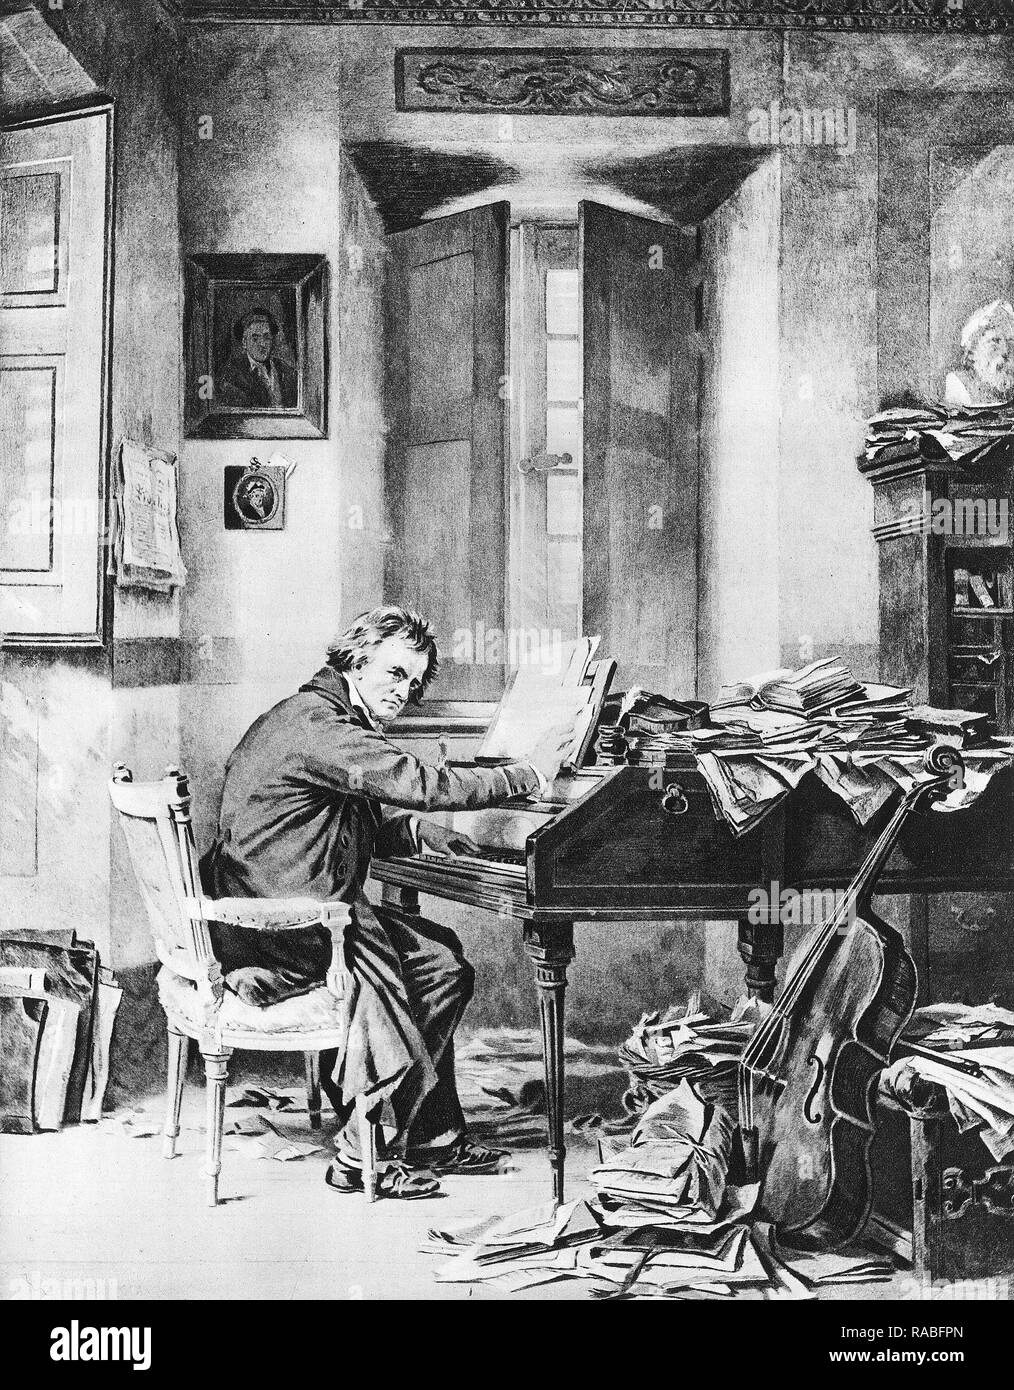 Composer Ludwig van Beethoven at work in his music studio, circa 1820 Stock Photo